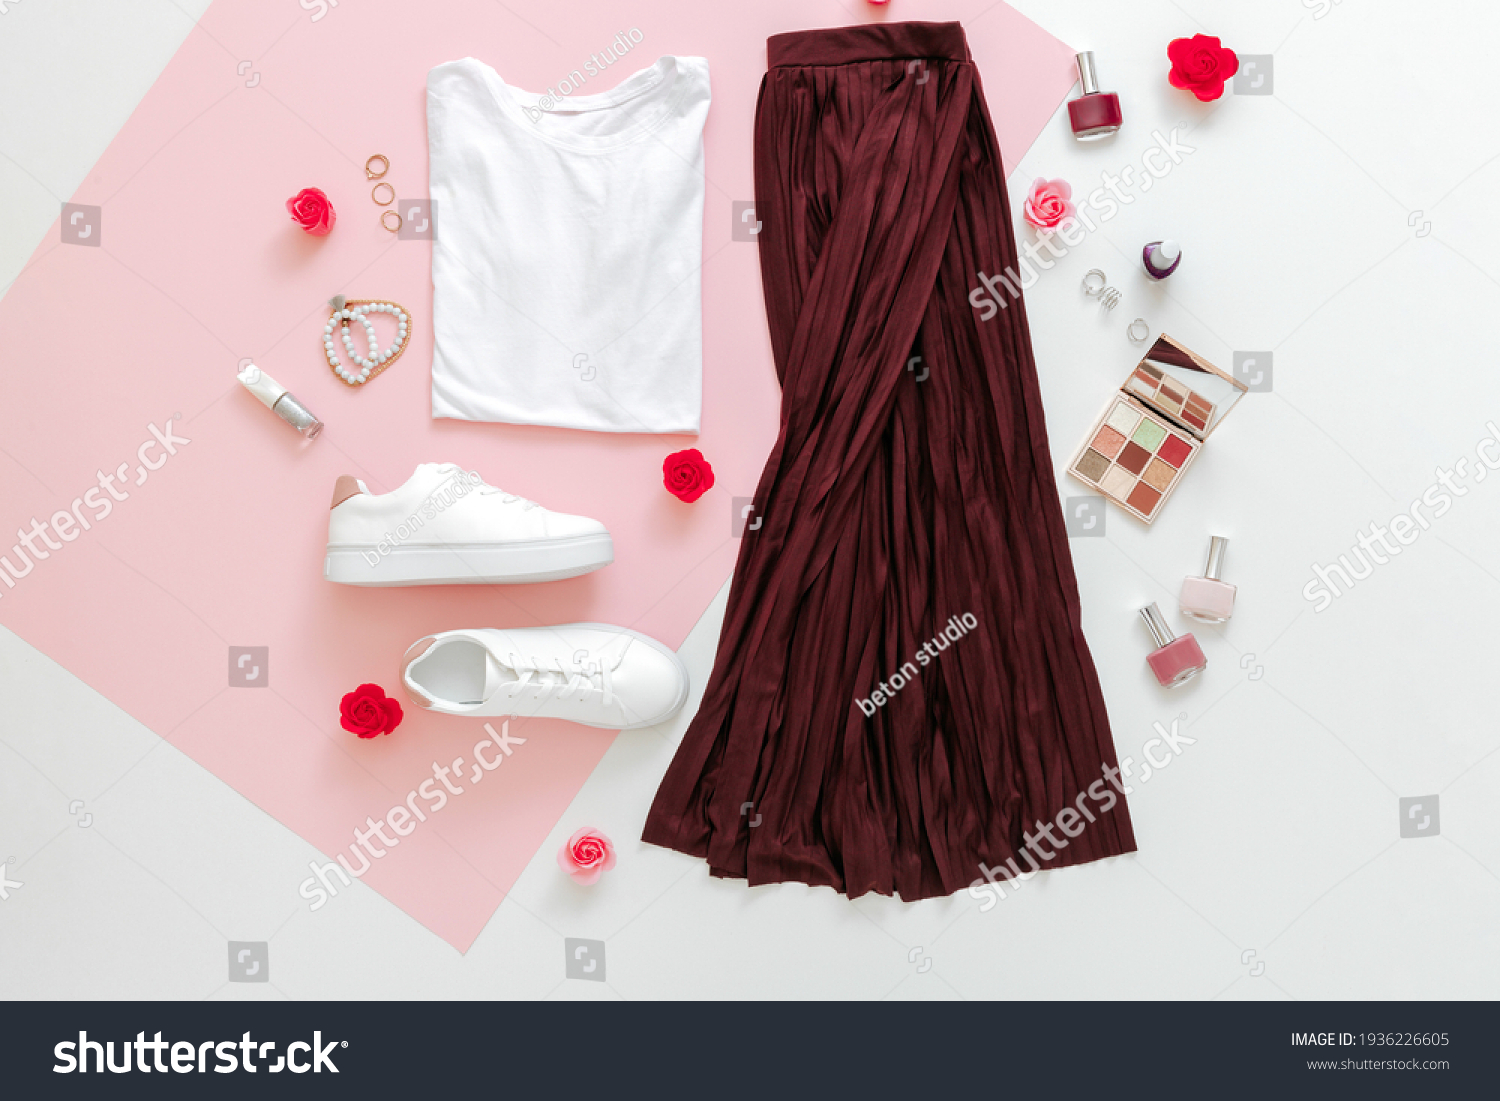 Folded clothes for women fashion urban basic outfit with accessories flowers make up cosmetics on pink background.Female spring look summer outfit skirt shoes sneakers basic tshirt bag. Top view. #1936226605